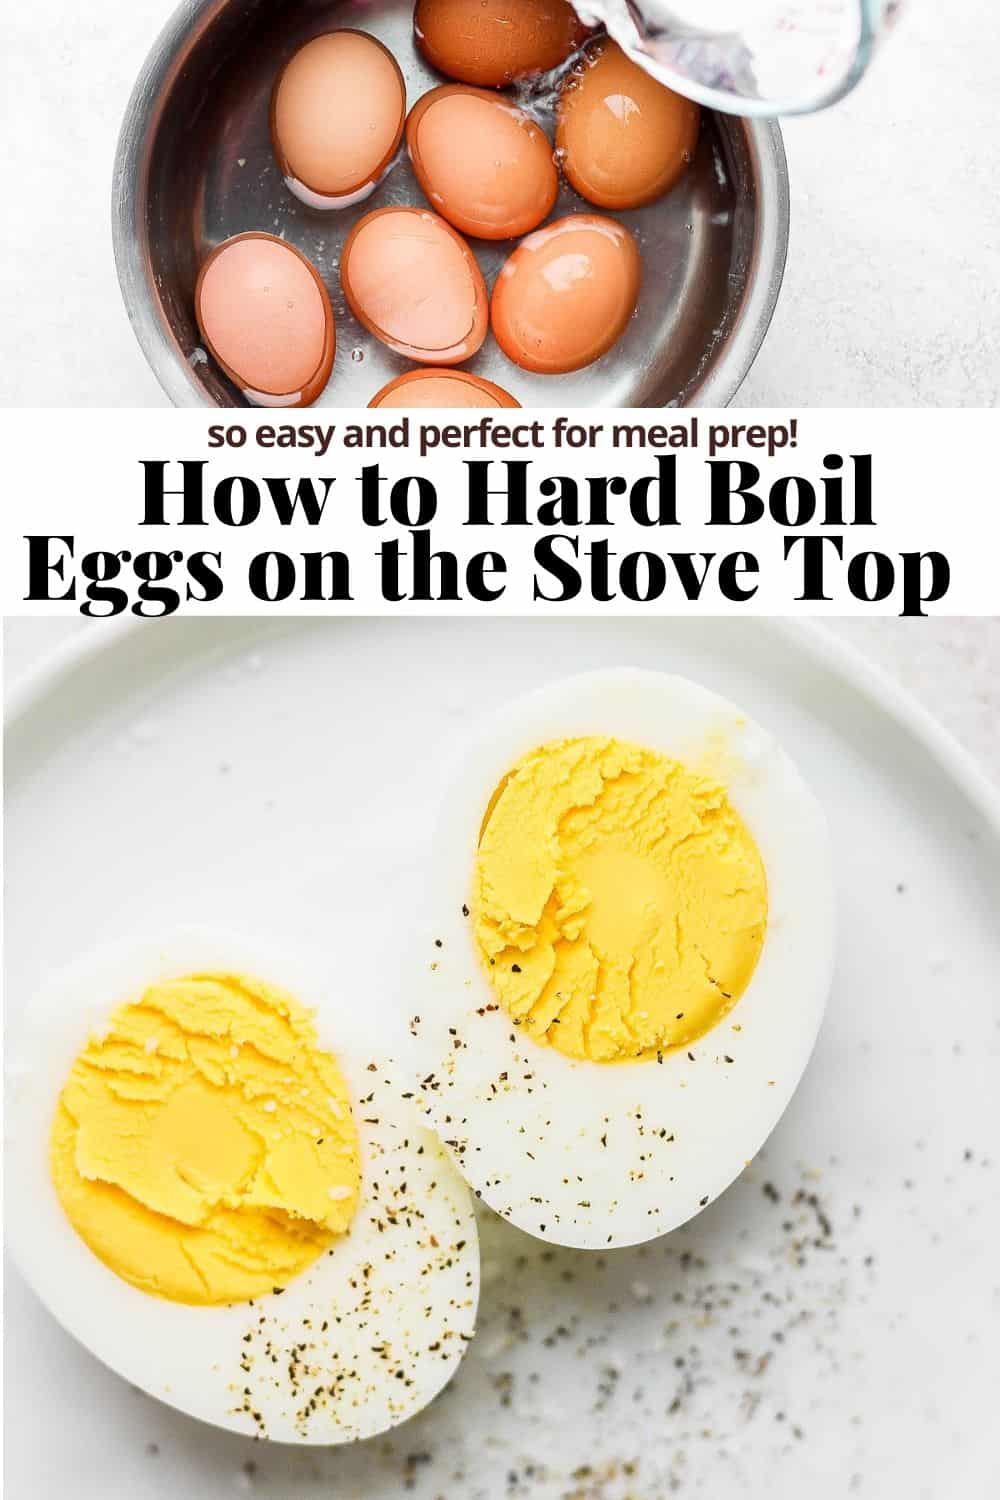 Pinterest image for how to hard boil eggs on the stove top.